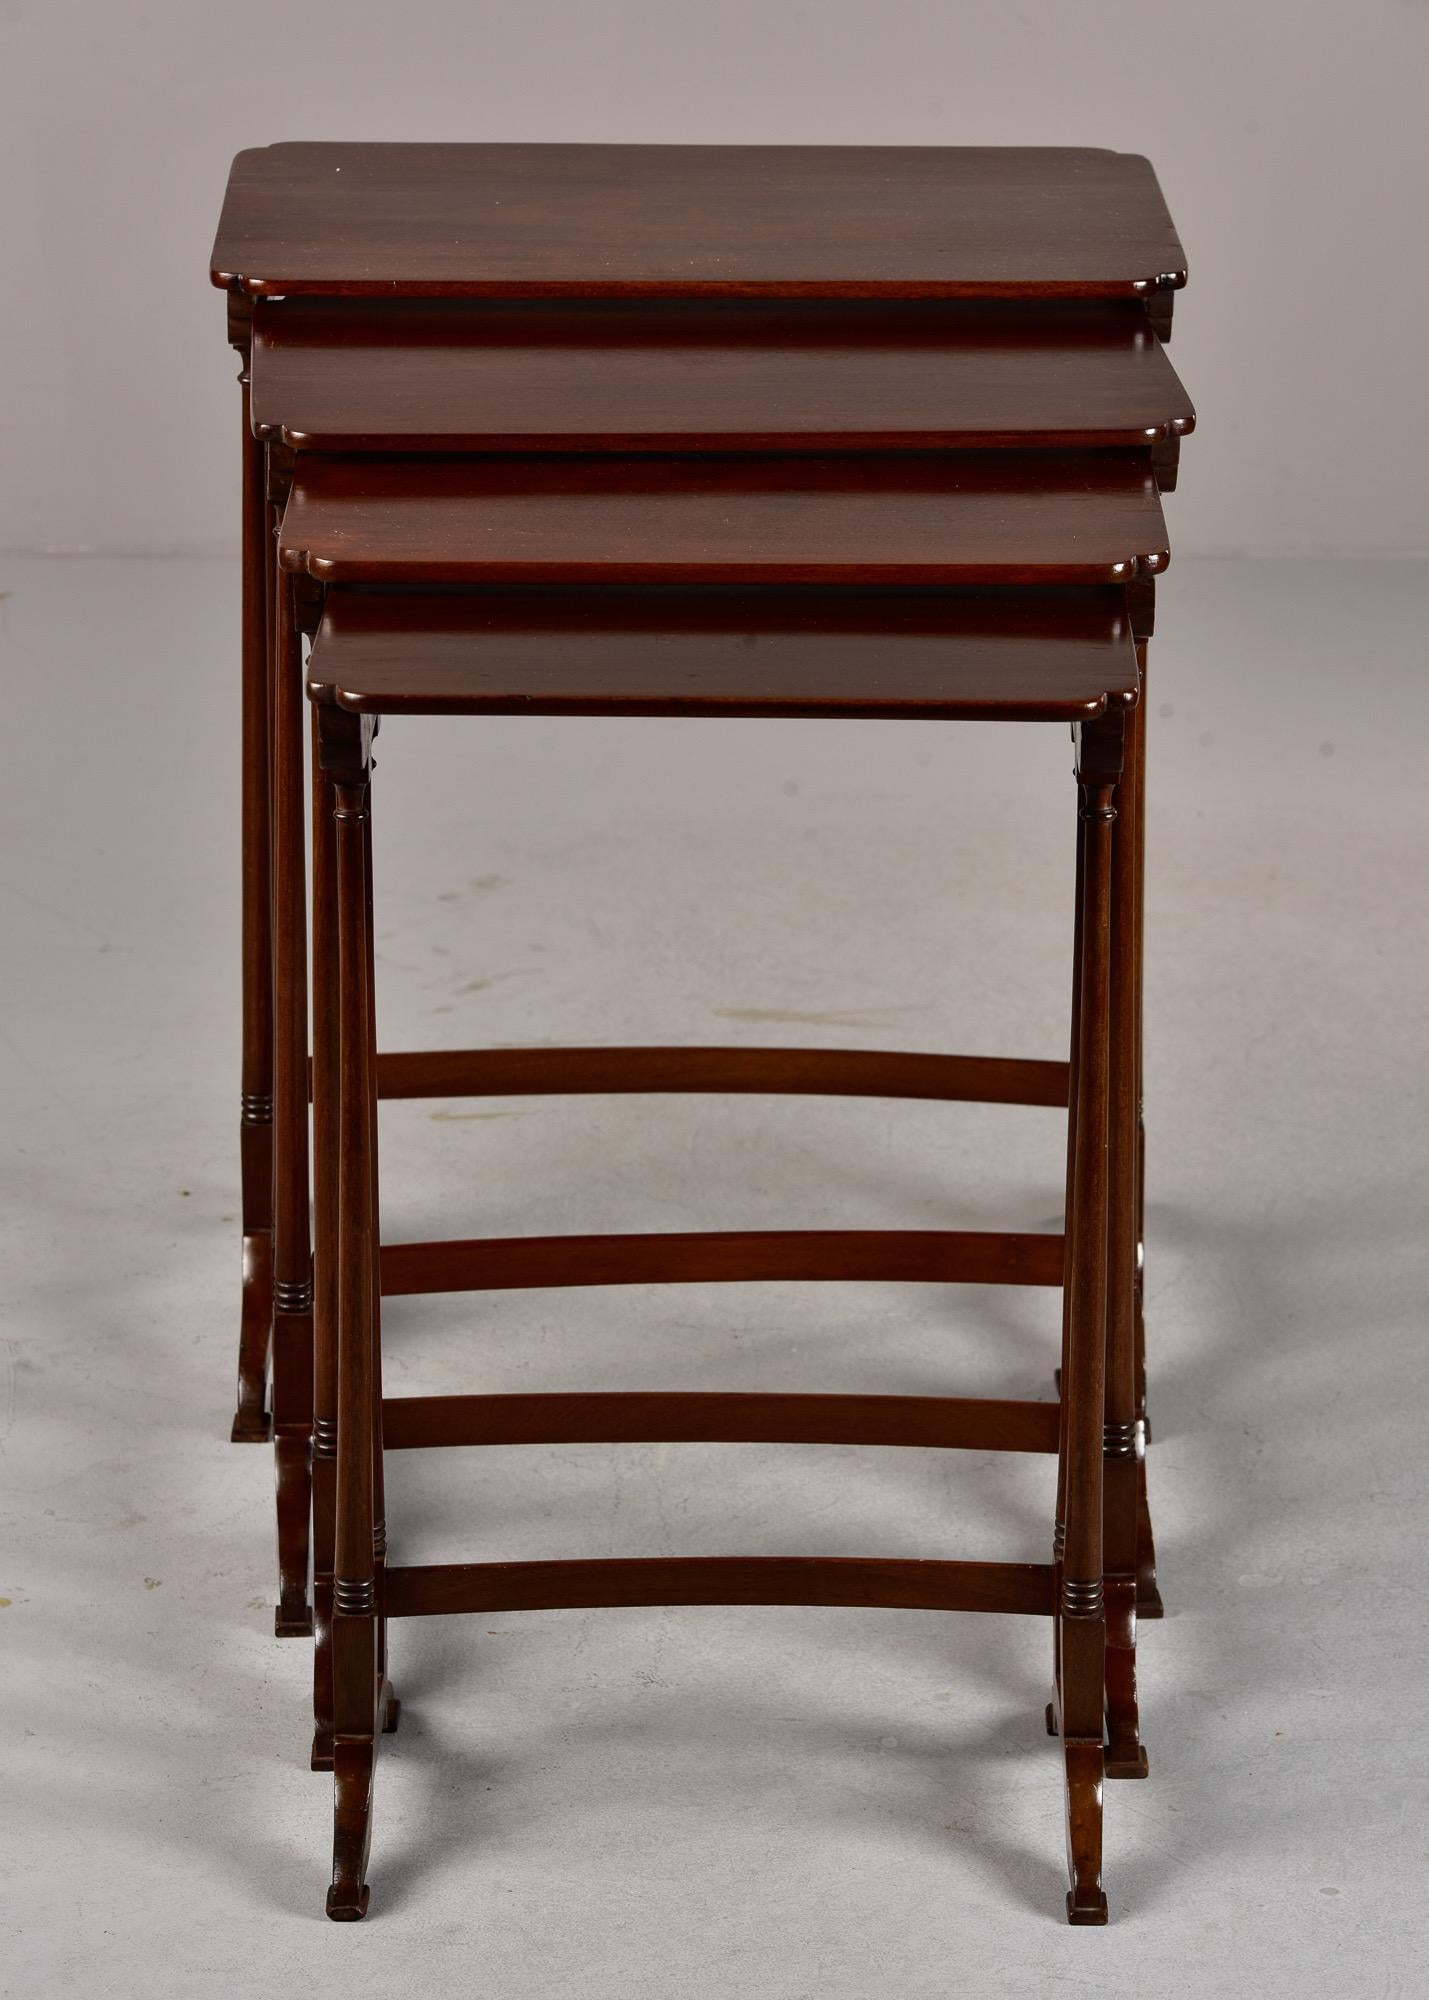 Circa 1920s set of four English mahogany nesting tables with slender frames and bases. Unknown maker. 

#1 = 28” h x 22” w x 16.25” d (top surface: 22” w x 14.75” d)
#2 = 27” h x 20” w x 14.5” d (top surface: 20” w x 13.5” d) 
#3 = 26” h x 18” w